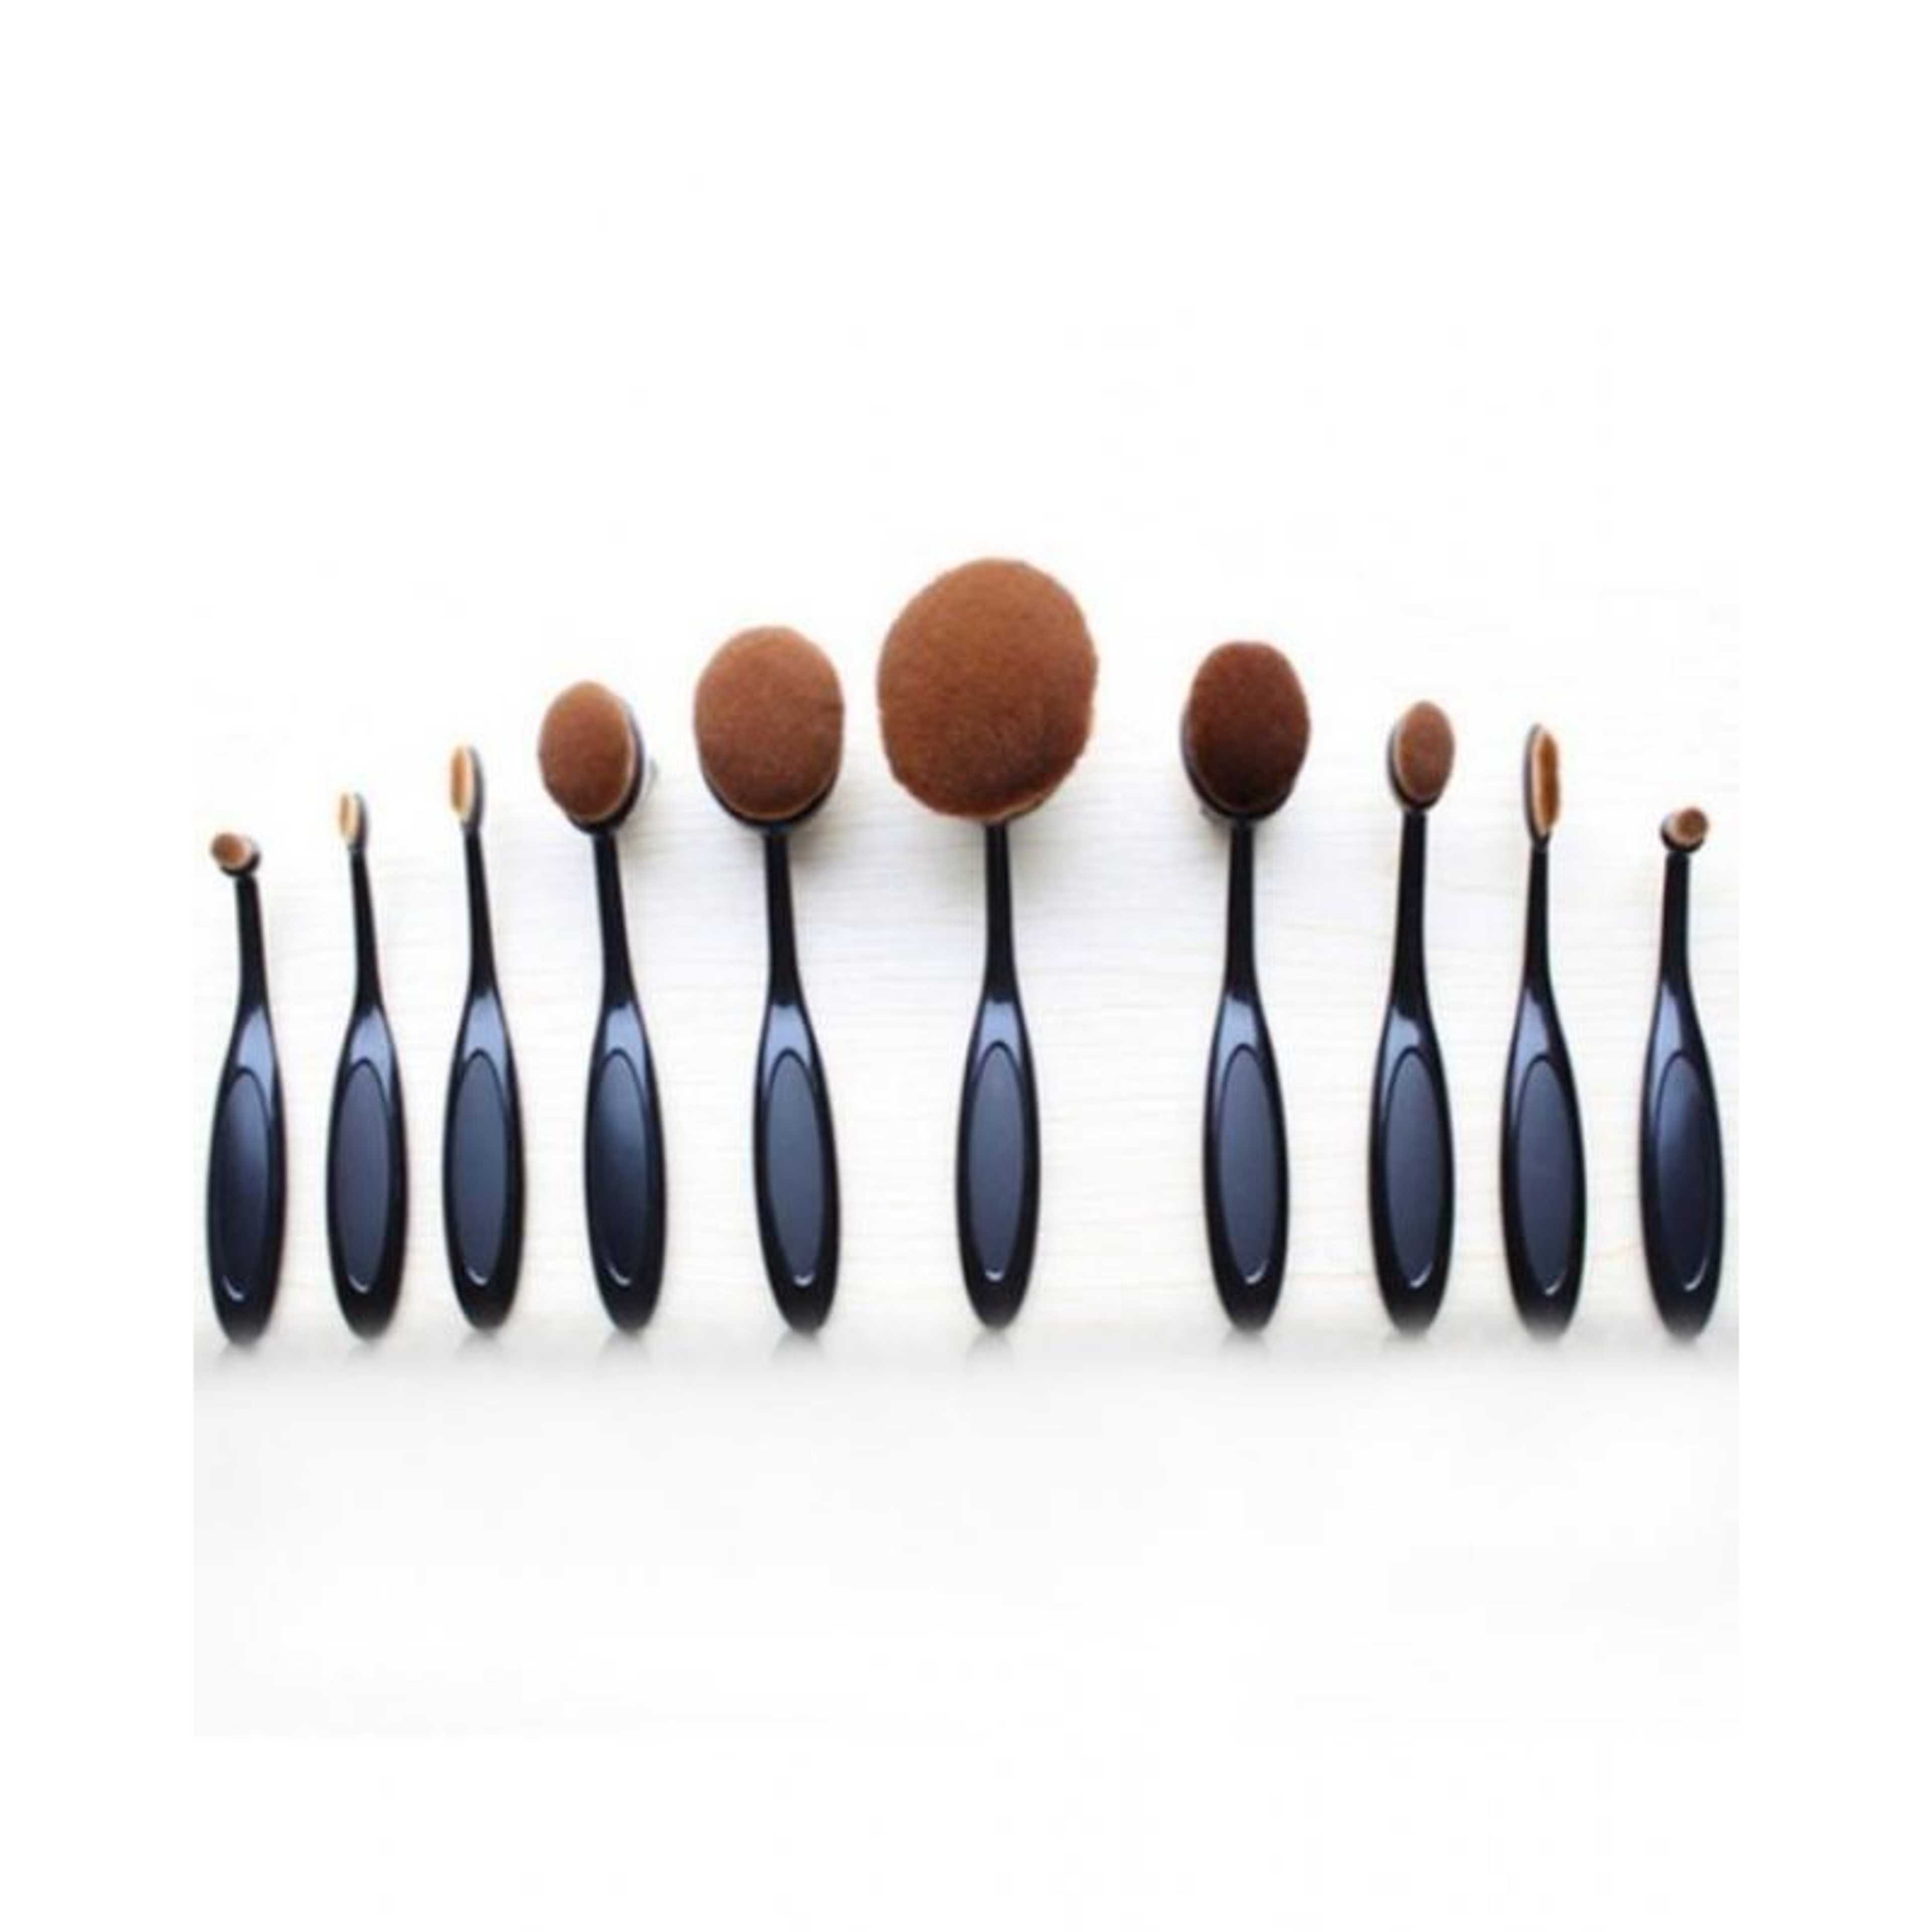 Oval Makeup Brushes - Black & Brown - Pack of 10